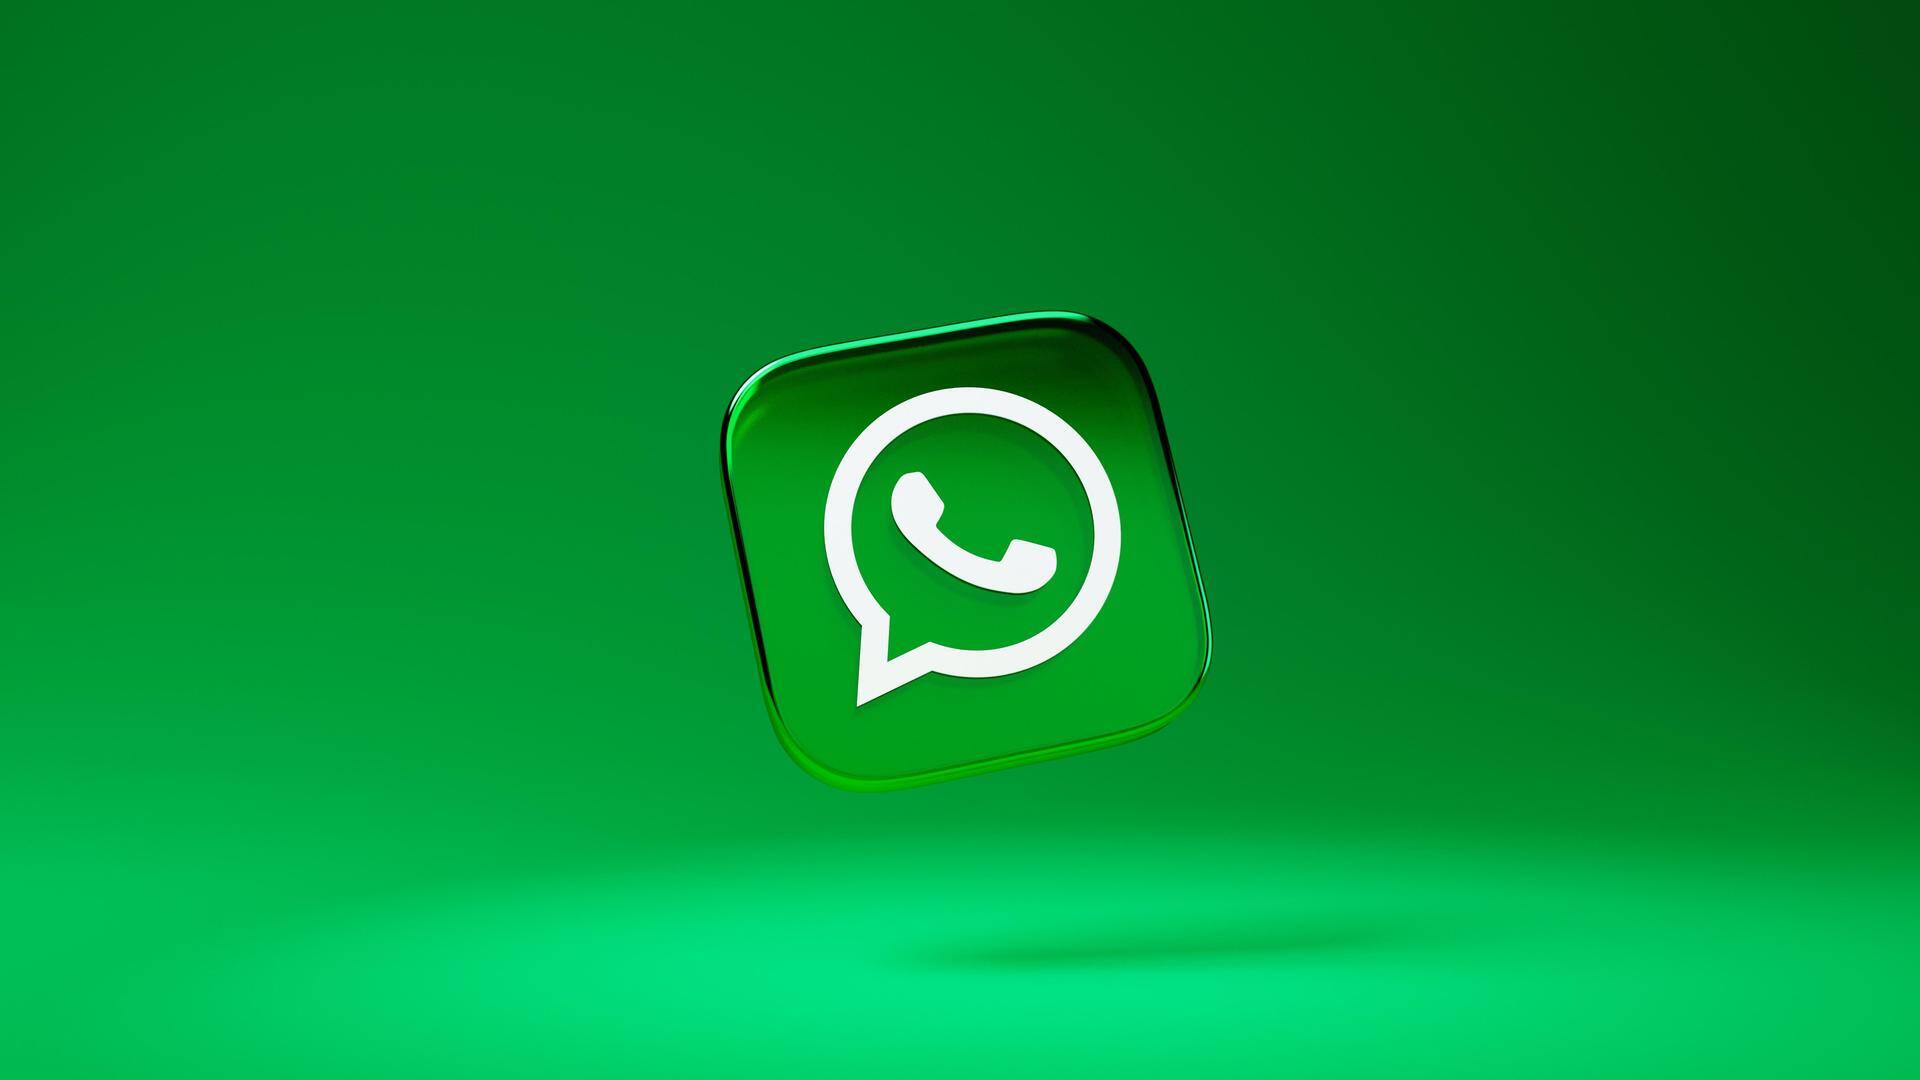 WhatsApp rolls out new iOS, web features: Check them out